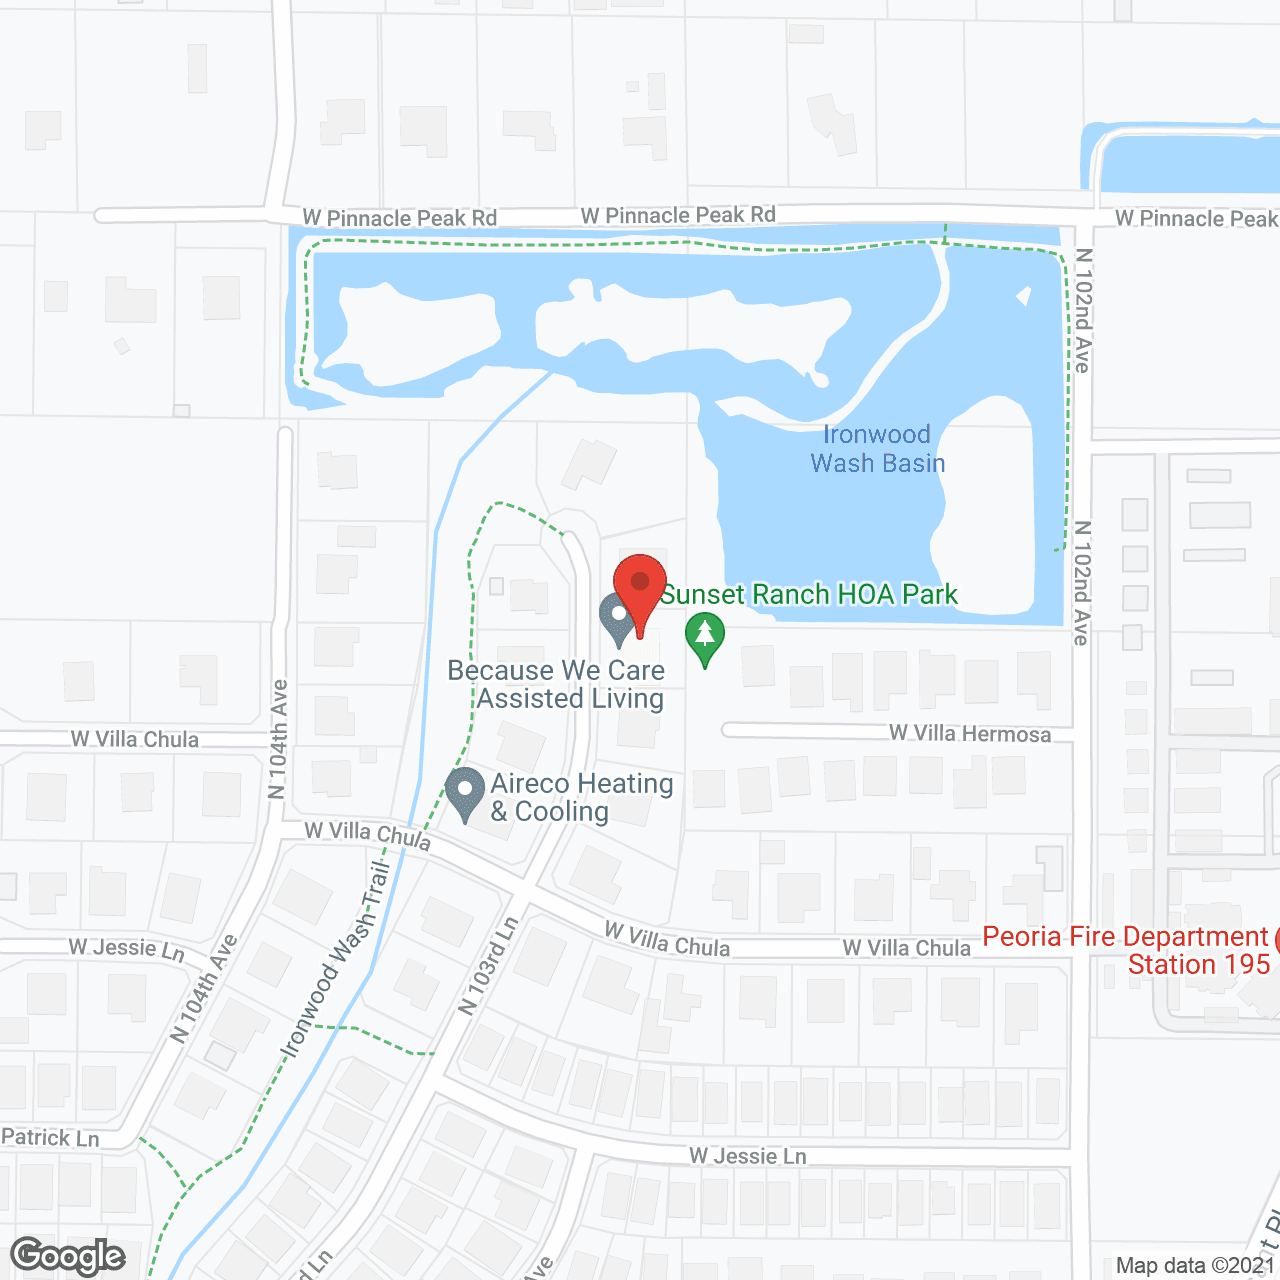 Because We Care 2 LLC in google map